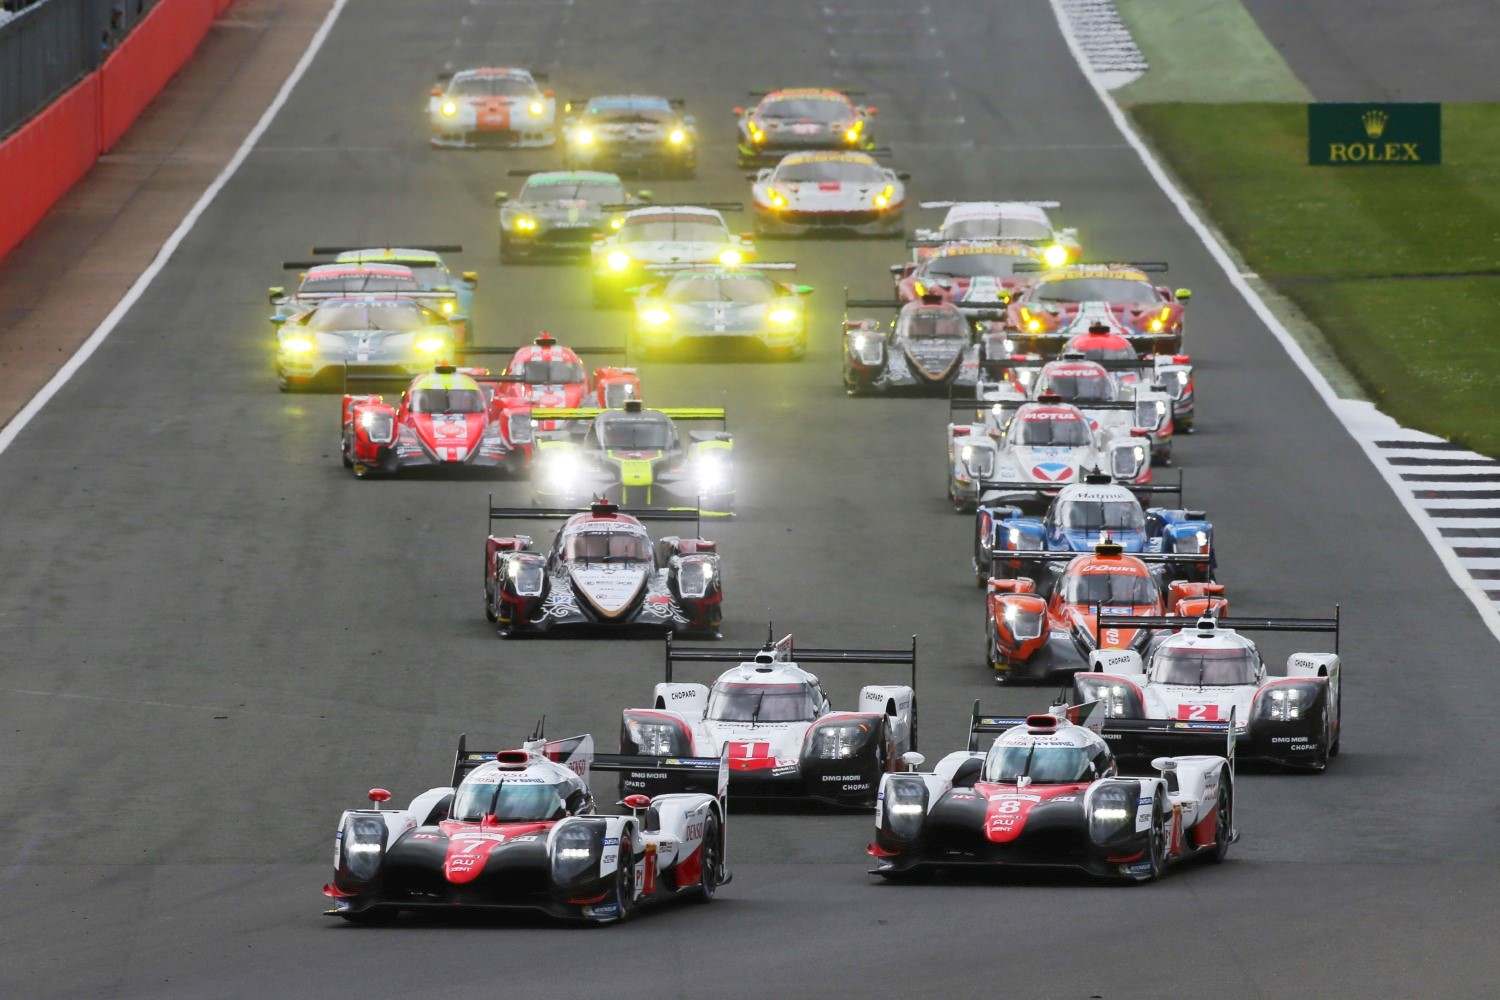 Not many people watch WEC and costs are too high